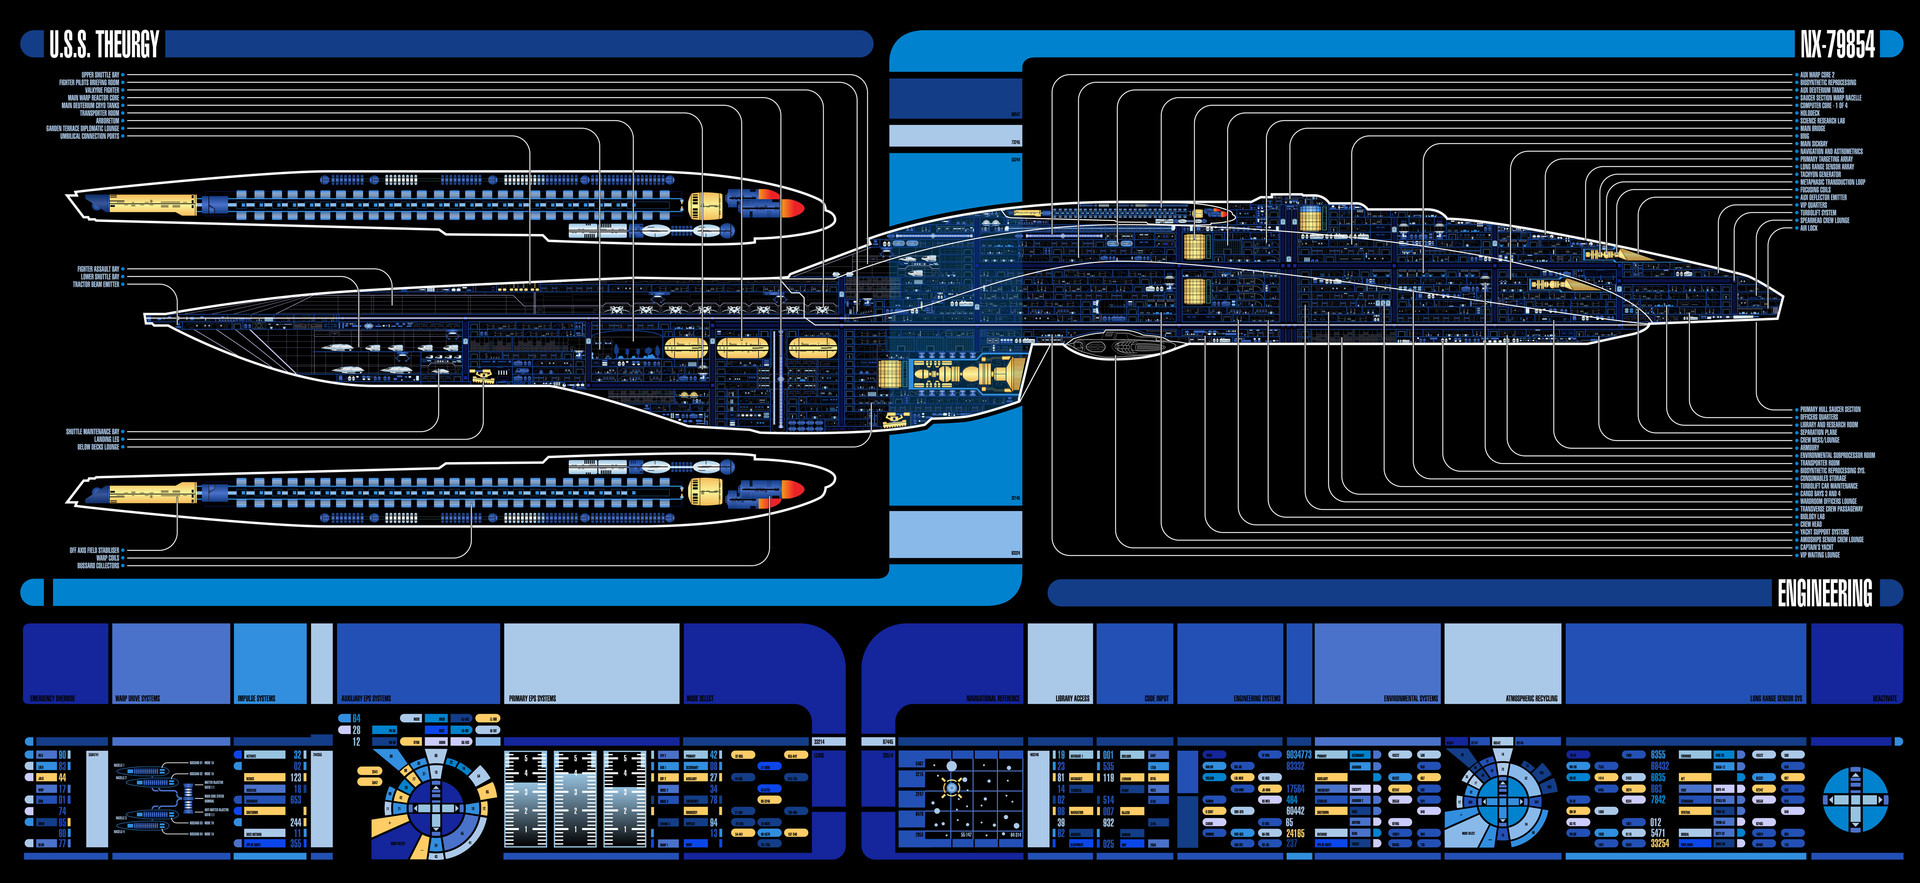 Auctor Lucan - Theurgy-class Starship Schematics